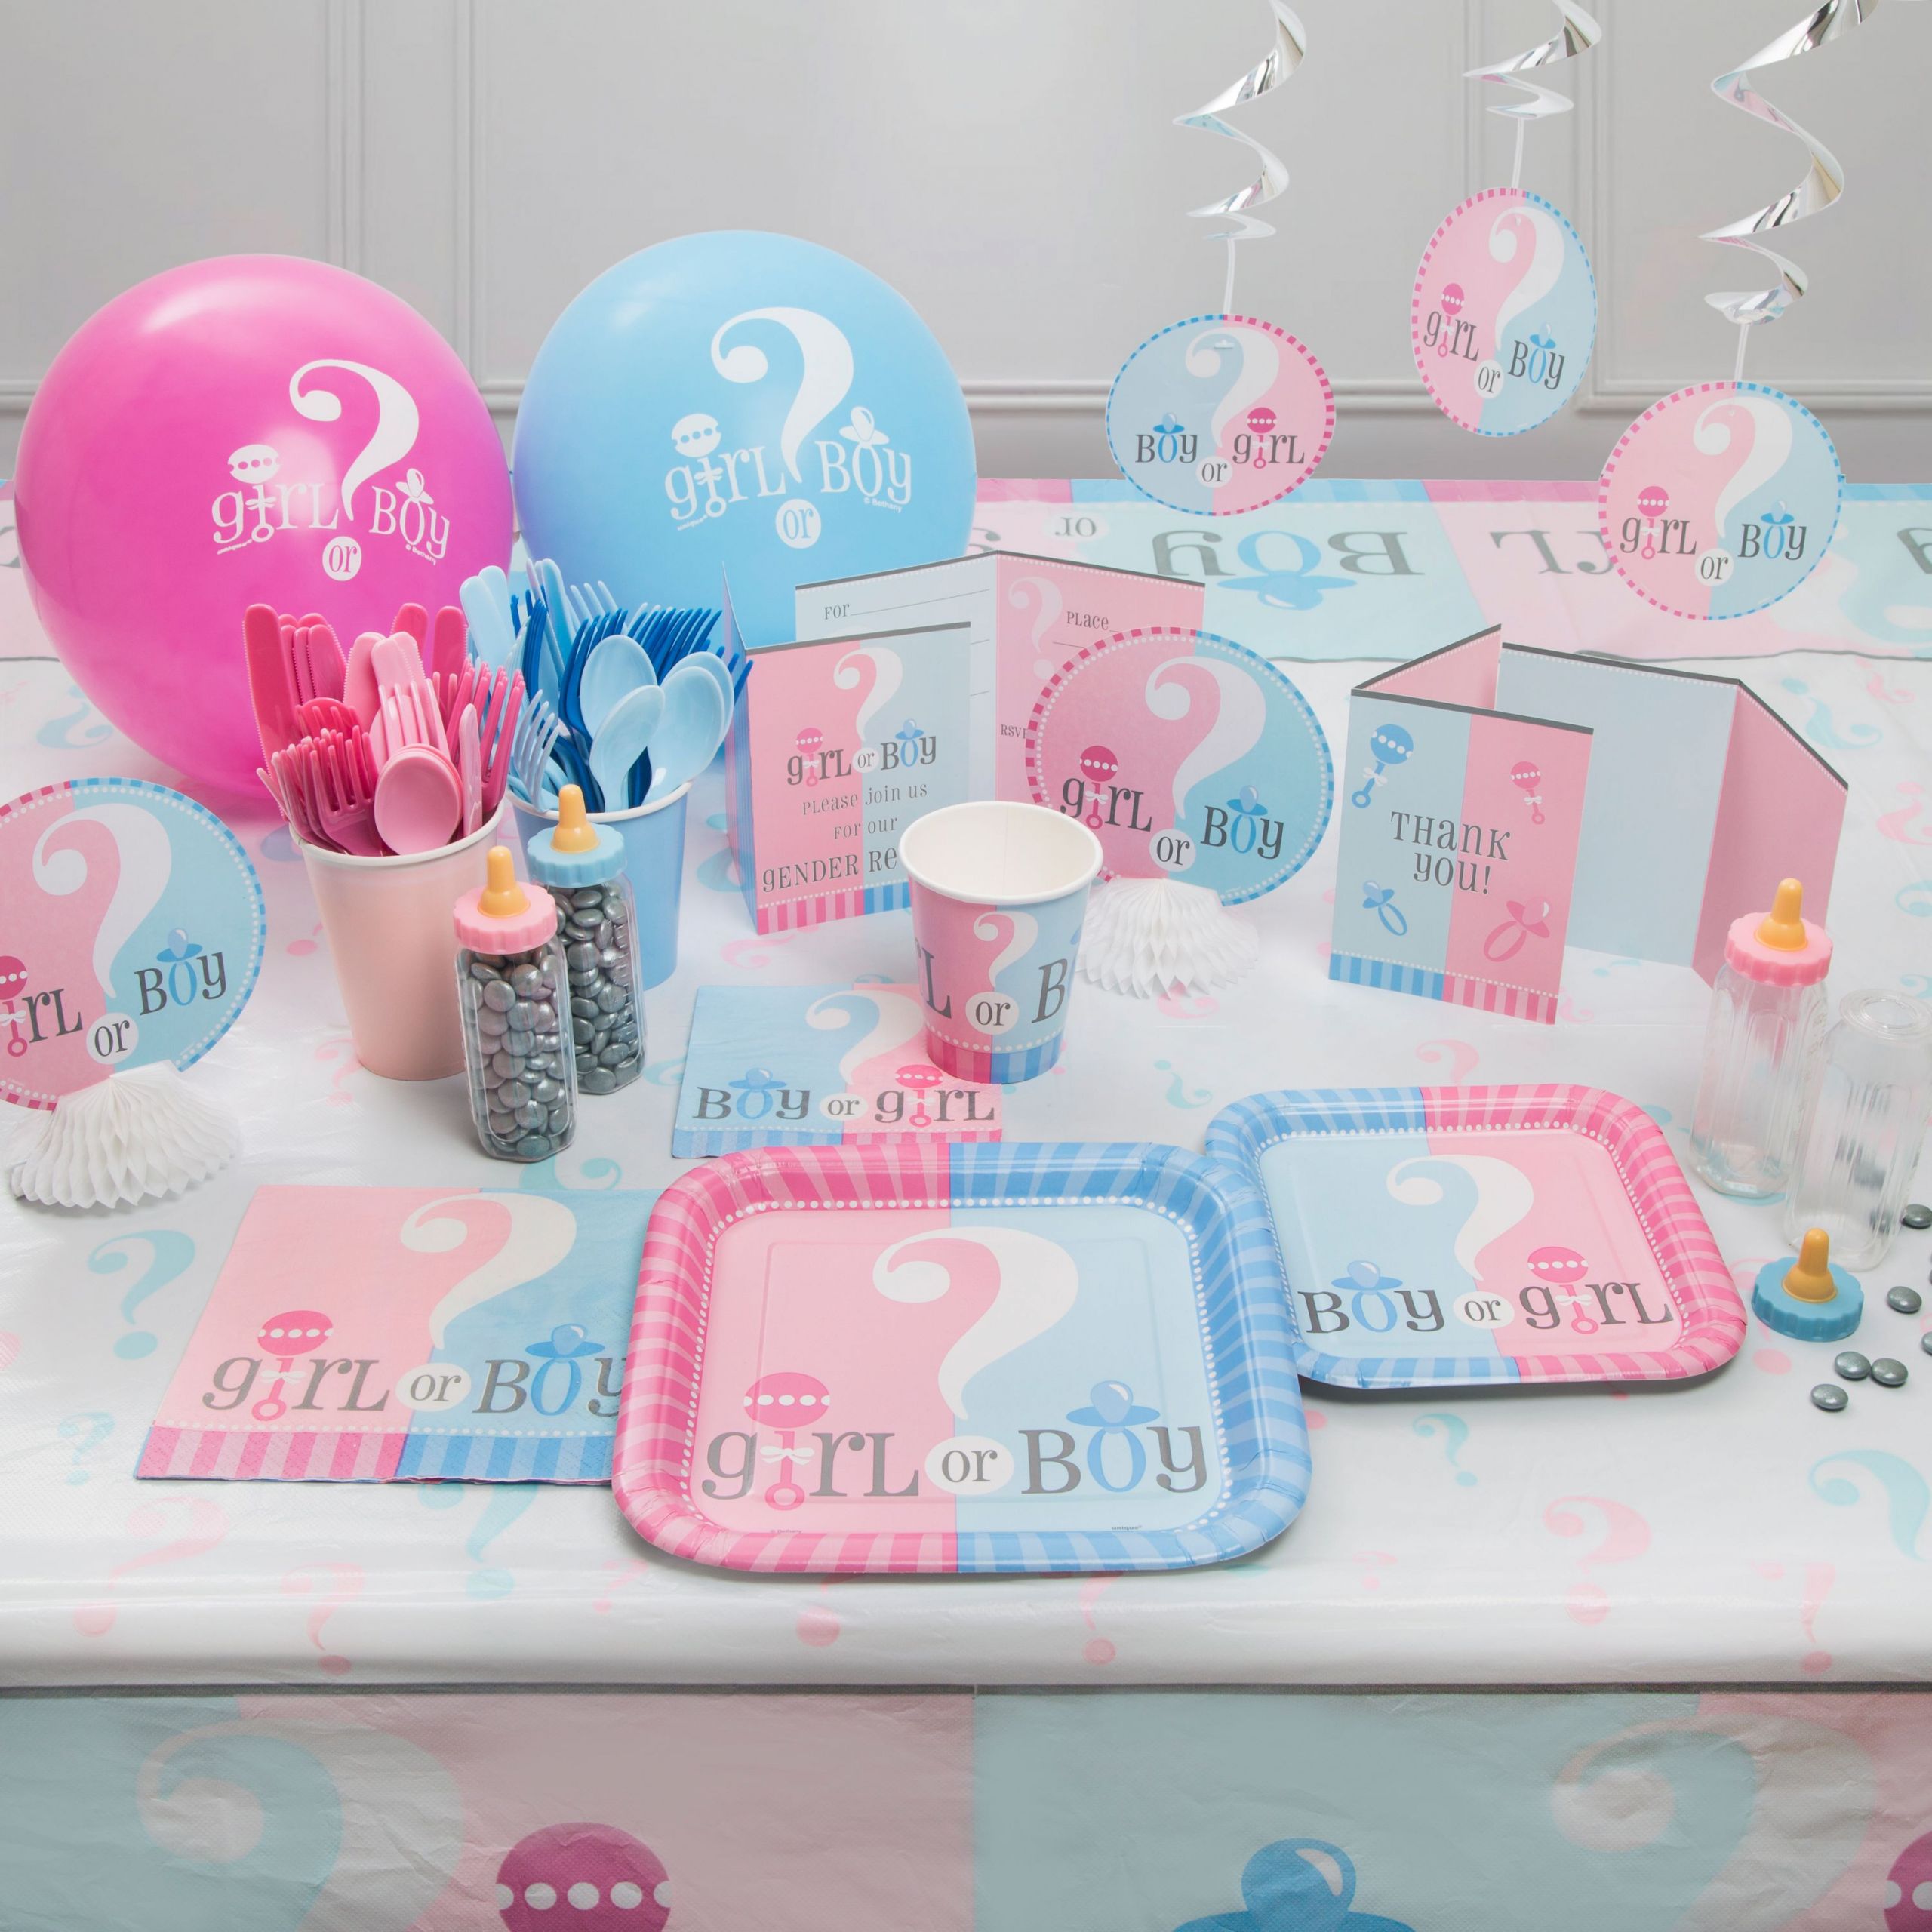 Gender Reveal Party Ideas Party City
 Gender Reveal Party Supplies Walmart